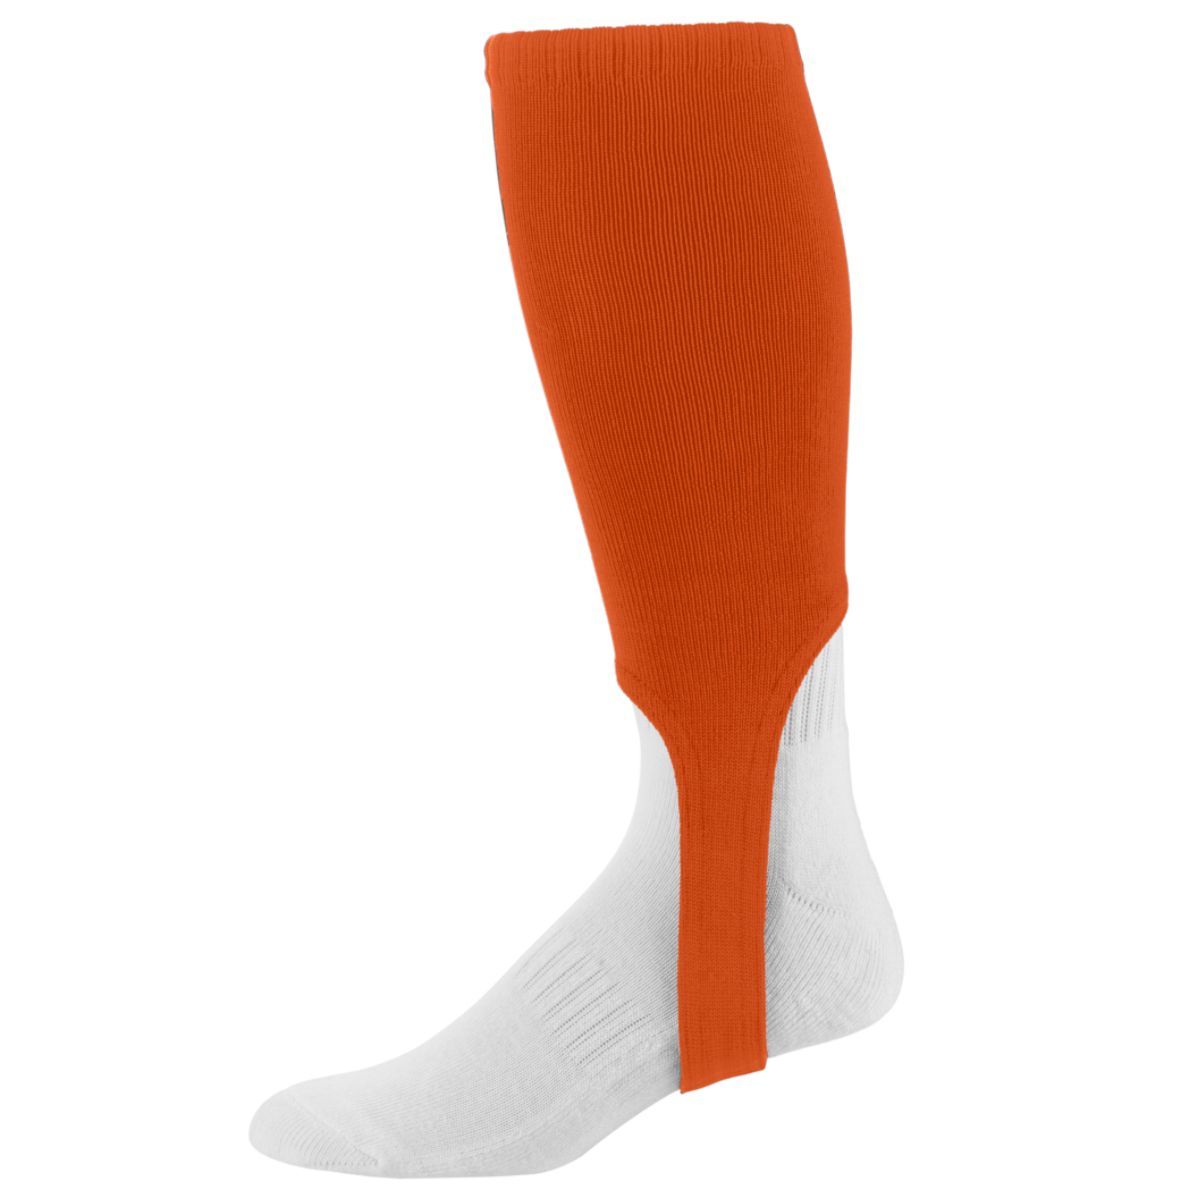 Augusta Sportswear Stirrup Sock in Orange  -Part of the Accessories, Augusta-Products, Accessories-Socks, Baseball, All-Sports, All-Sports-1 product lines at KanaleyCreations.com